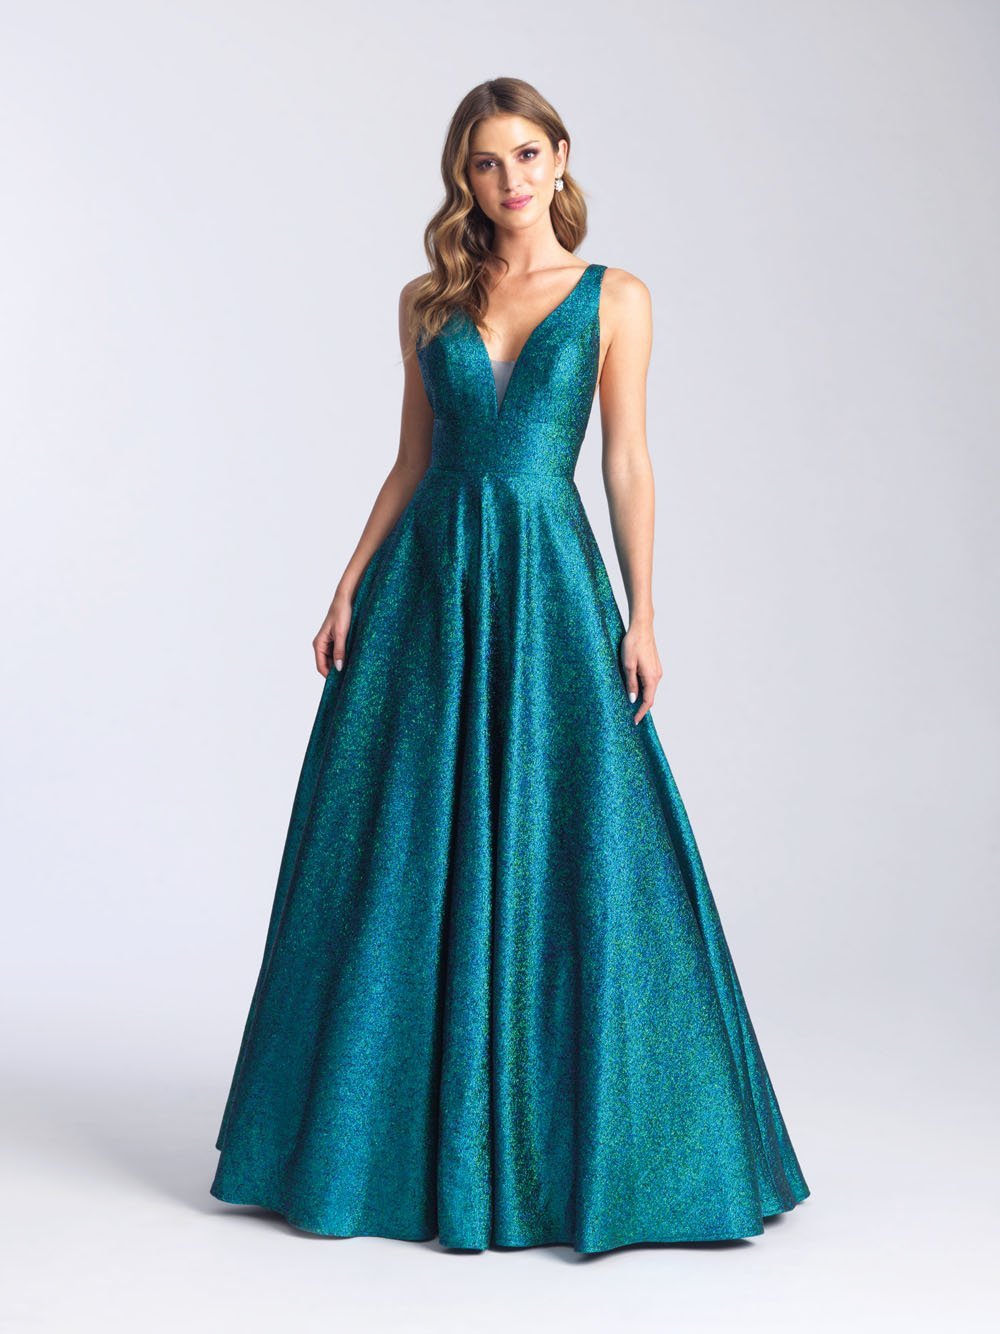 Madison James 20-307 dress images in these colors: Fuchsia, Green, Gold.